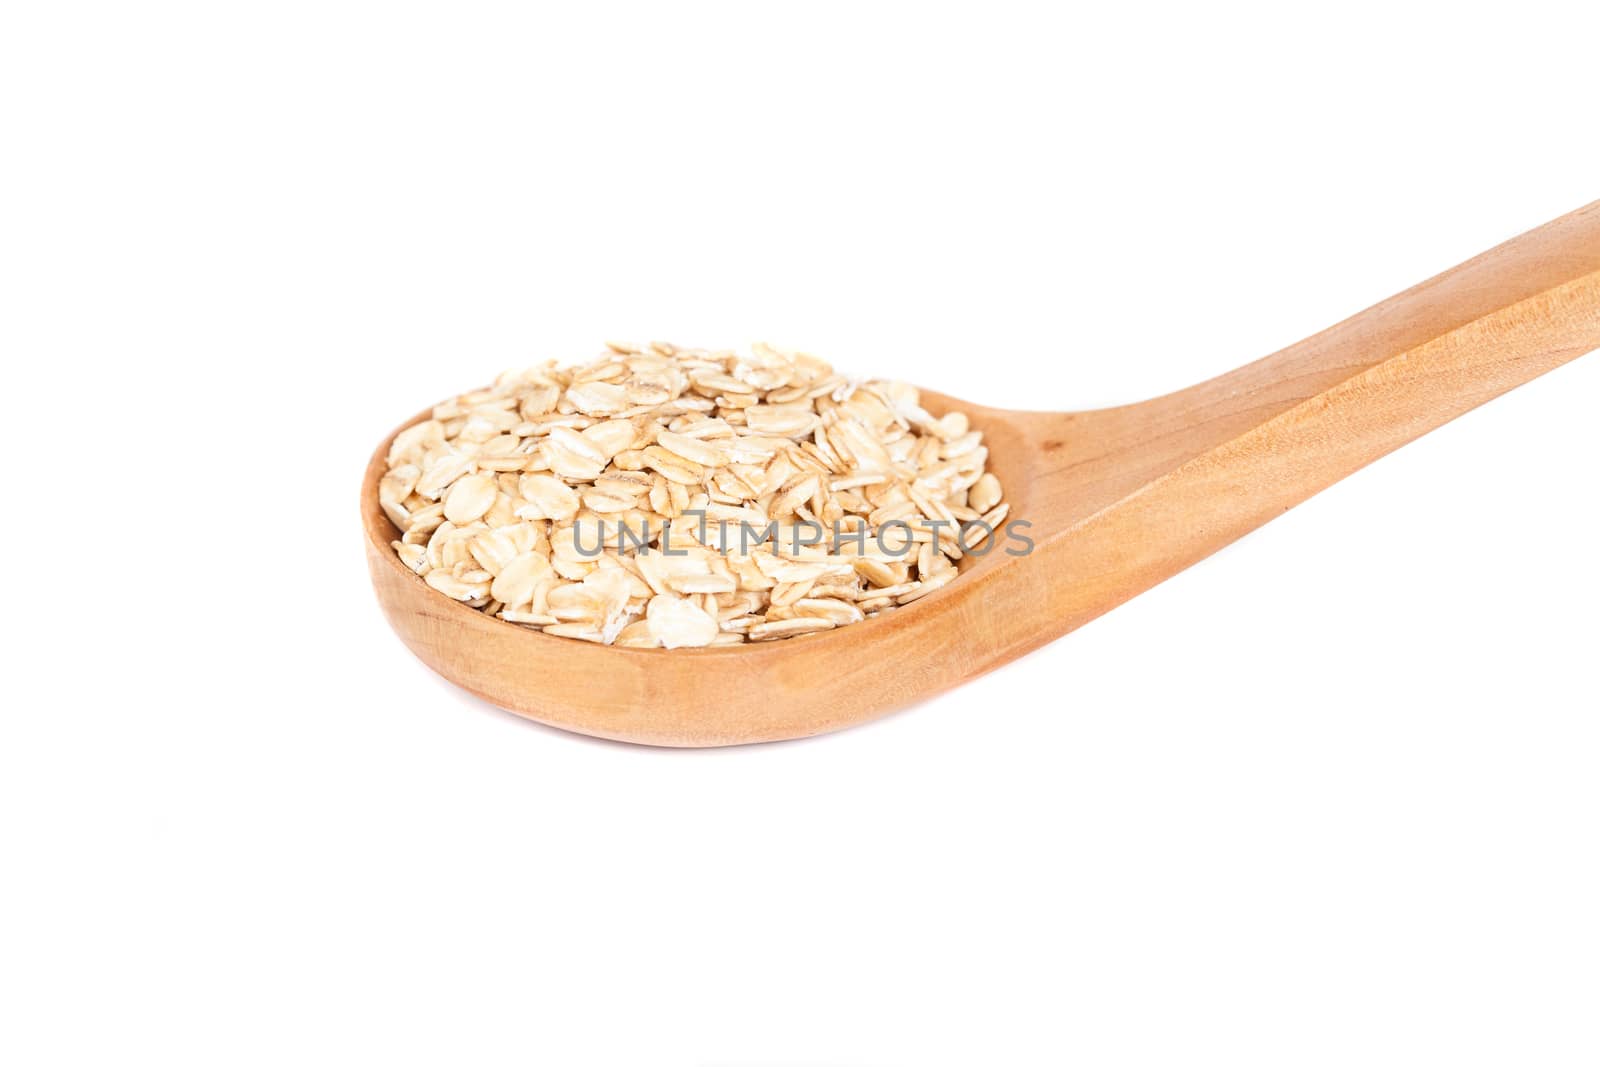 Oats flakes pile in wood spoon on white background by amnarj2006